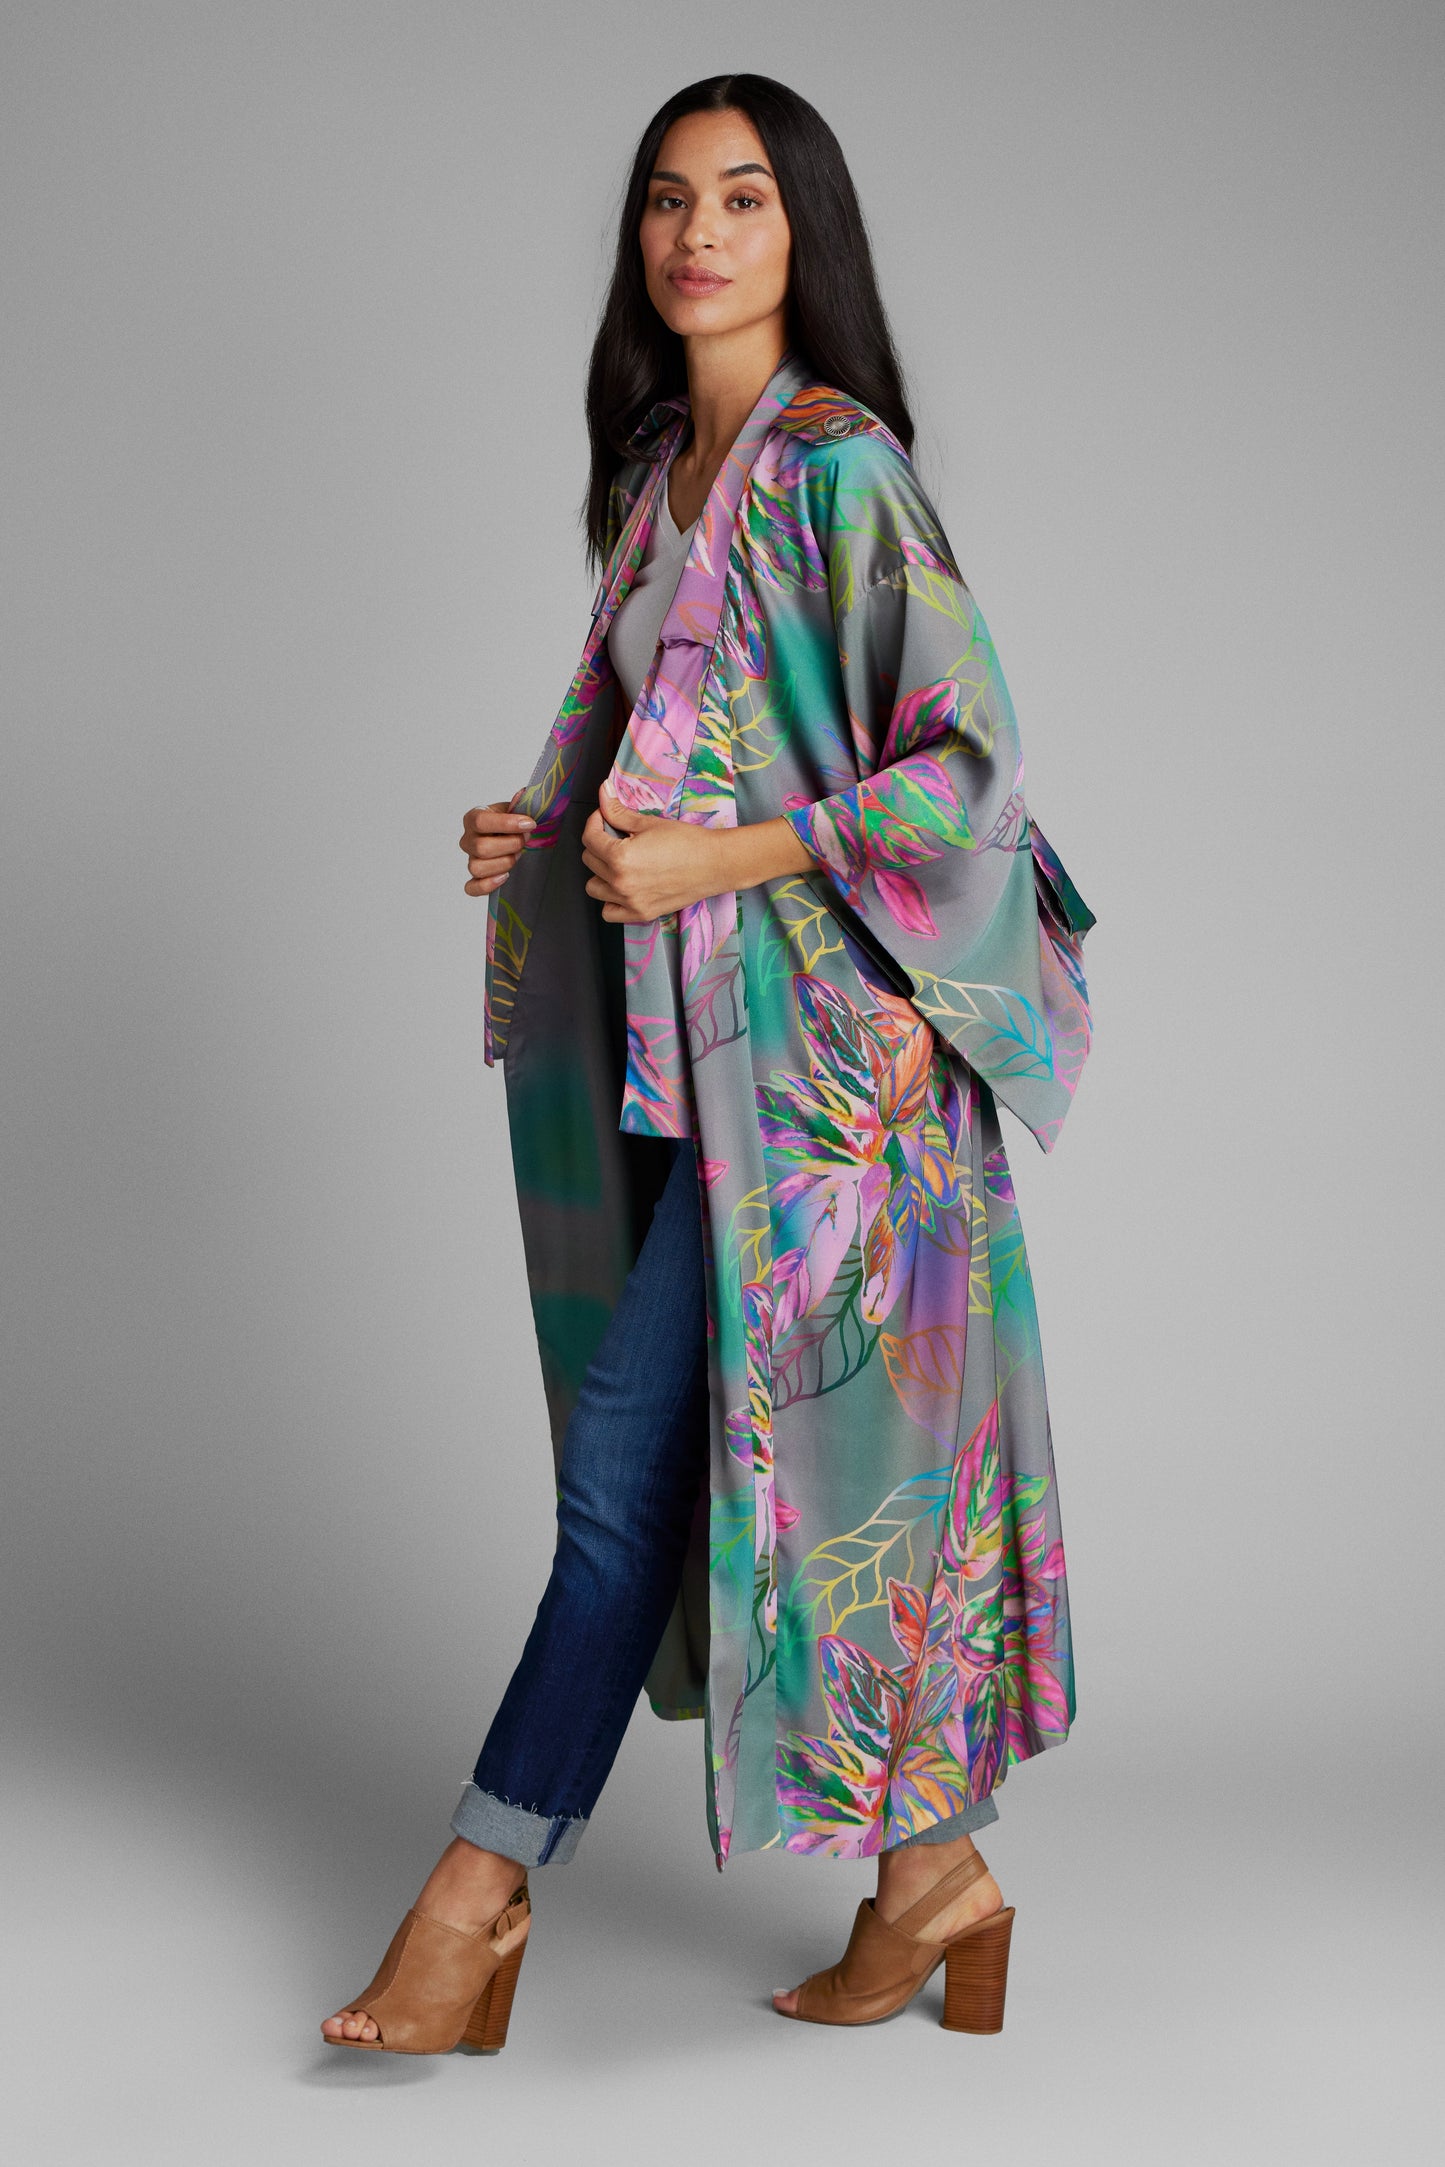 Woman standing wearing an all over tropical printed kimono duster made from recycled materials